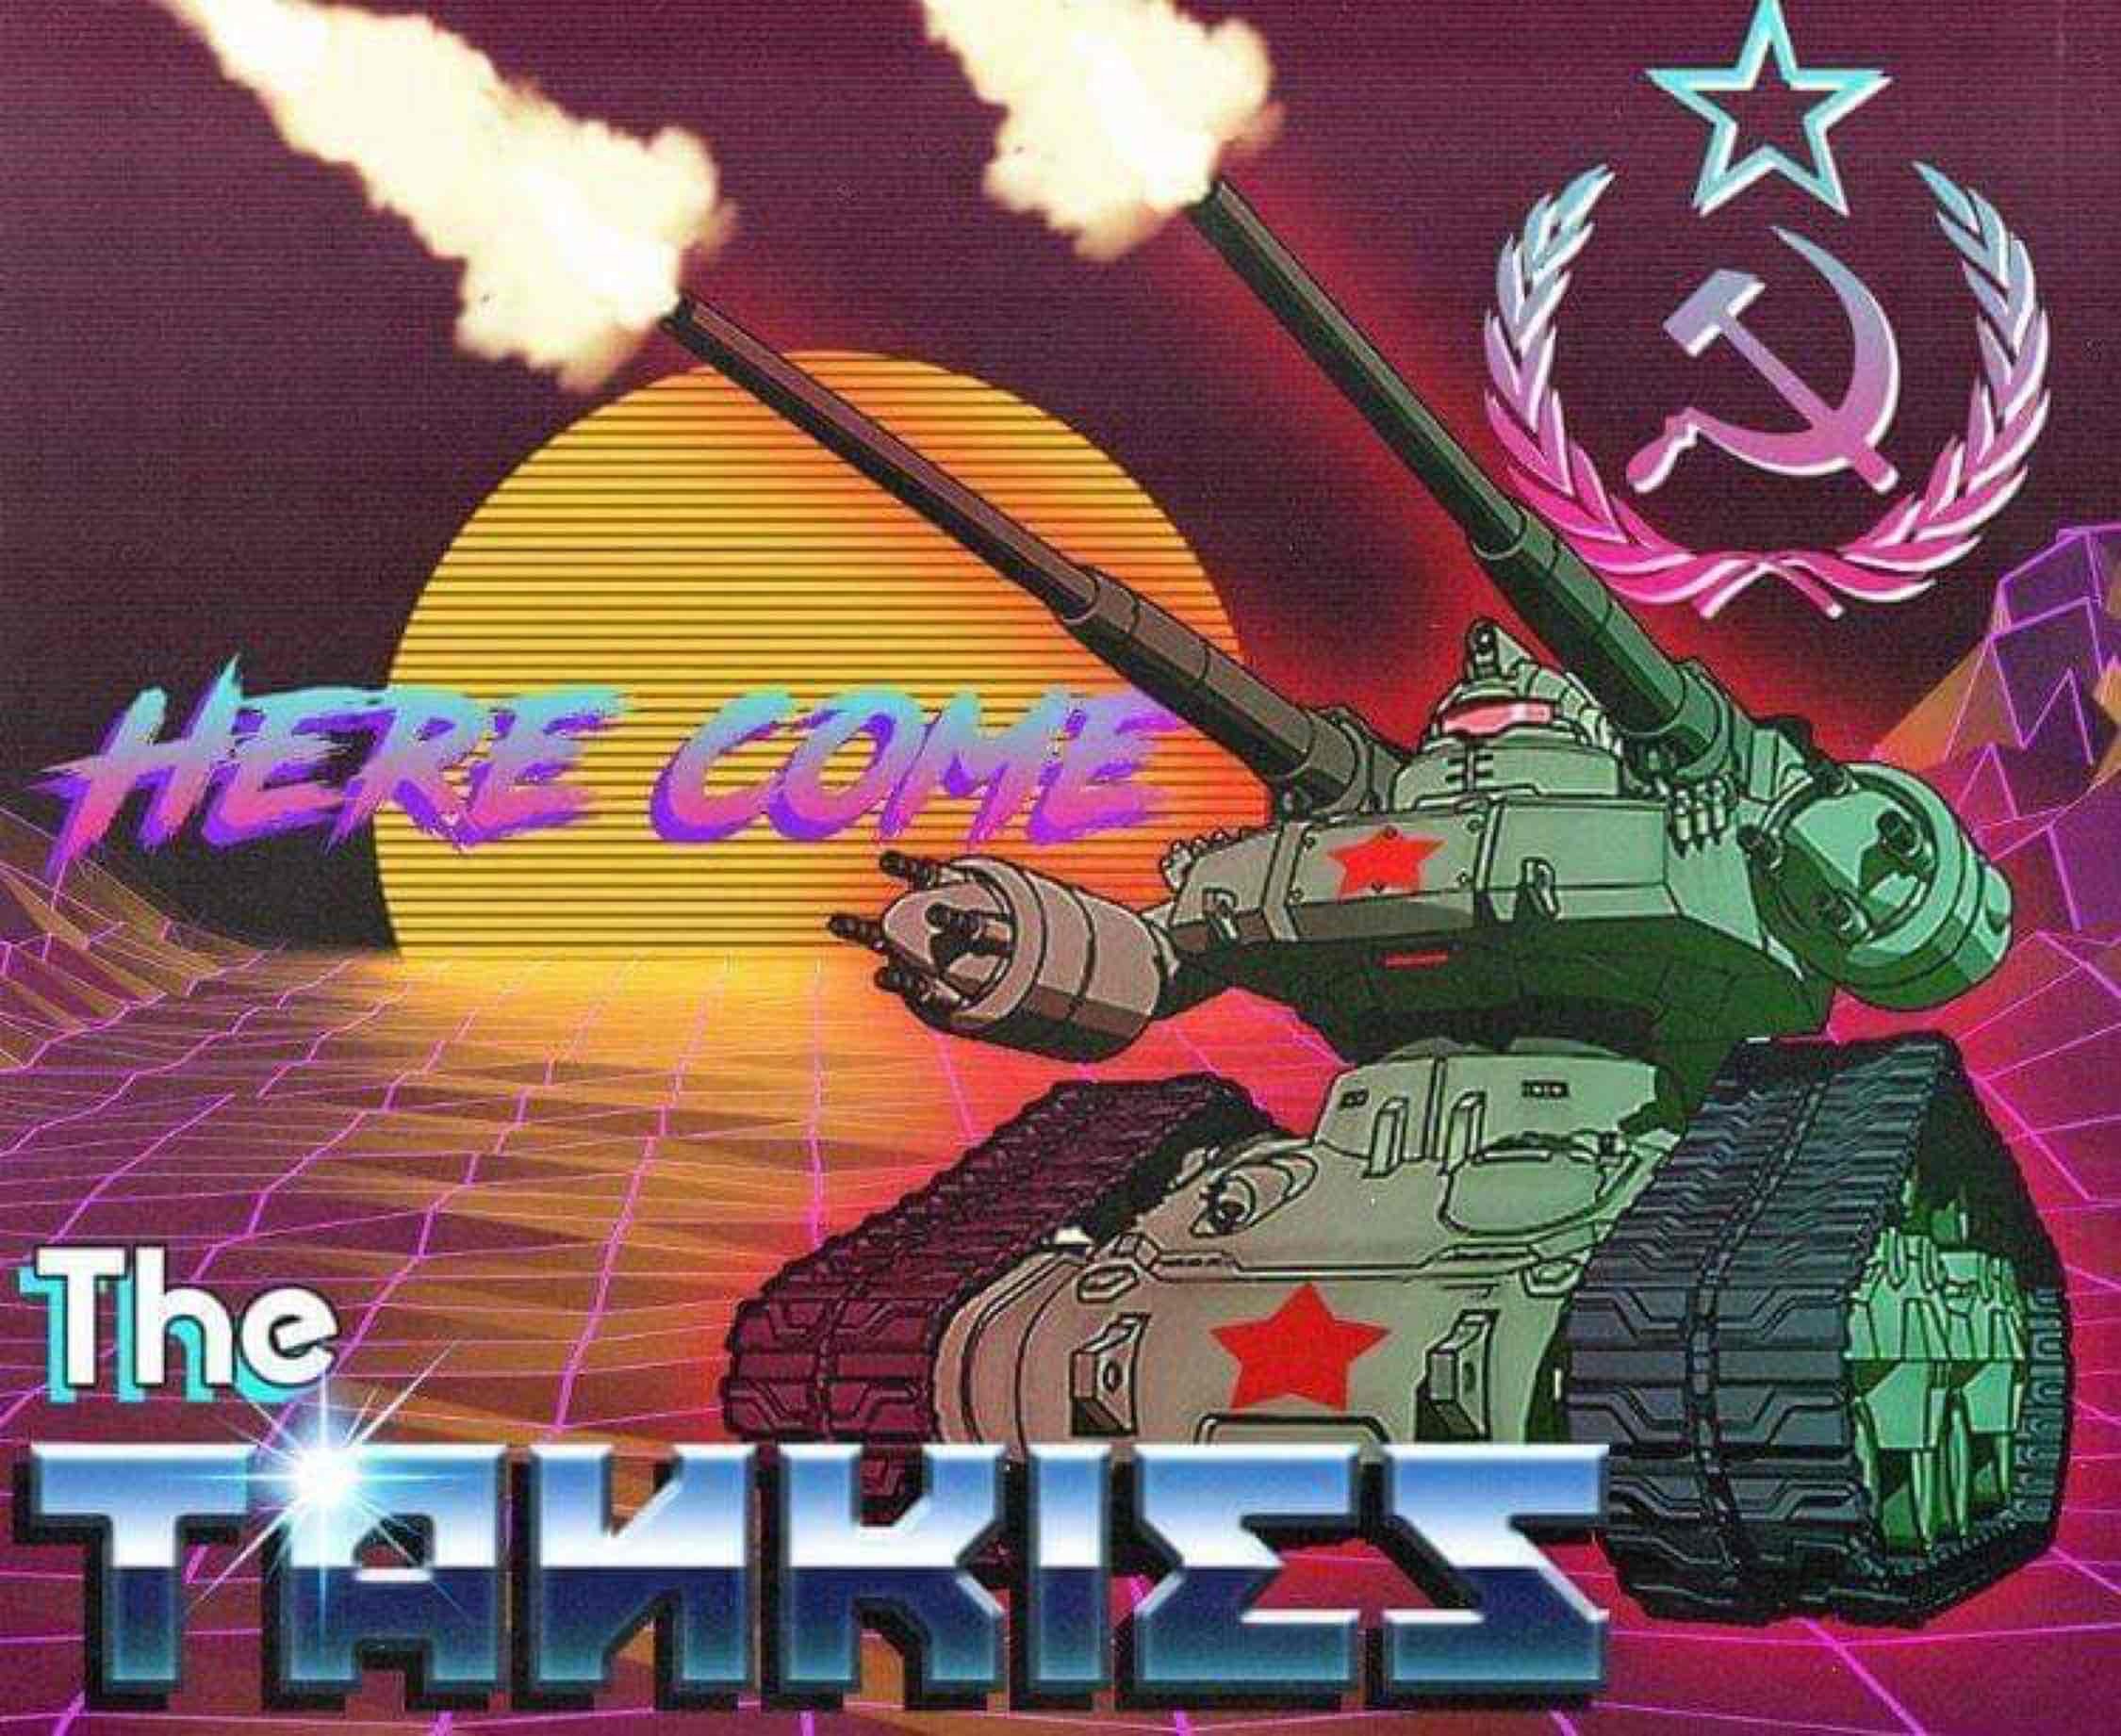 "Here come the tankies"